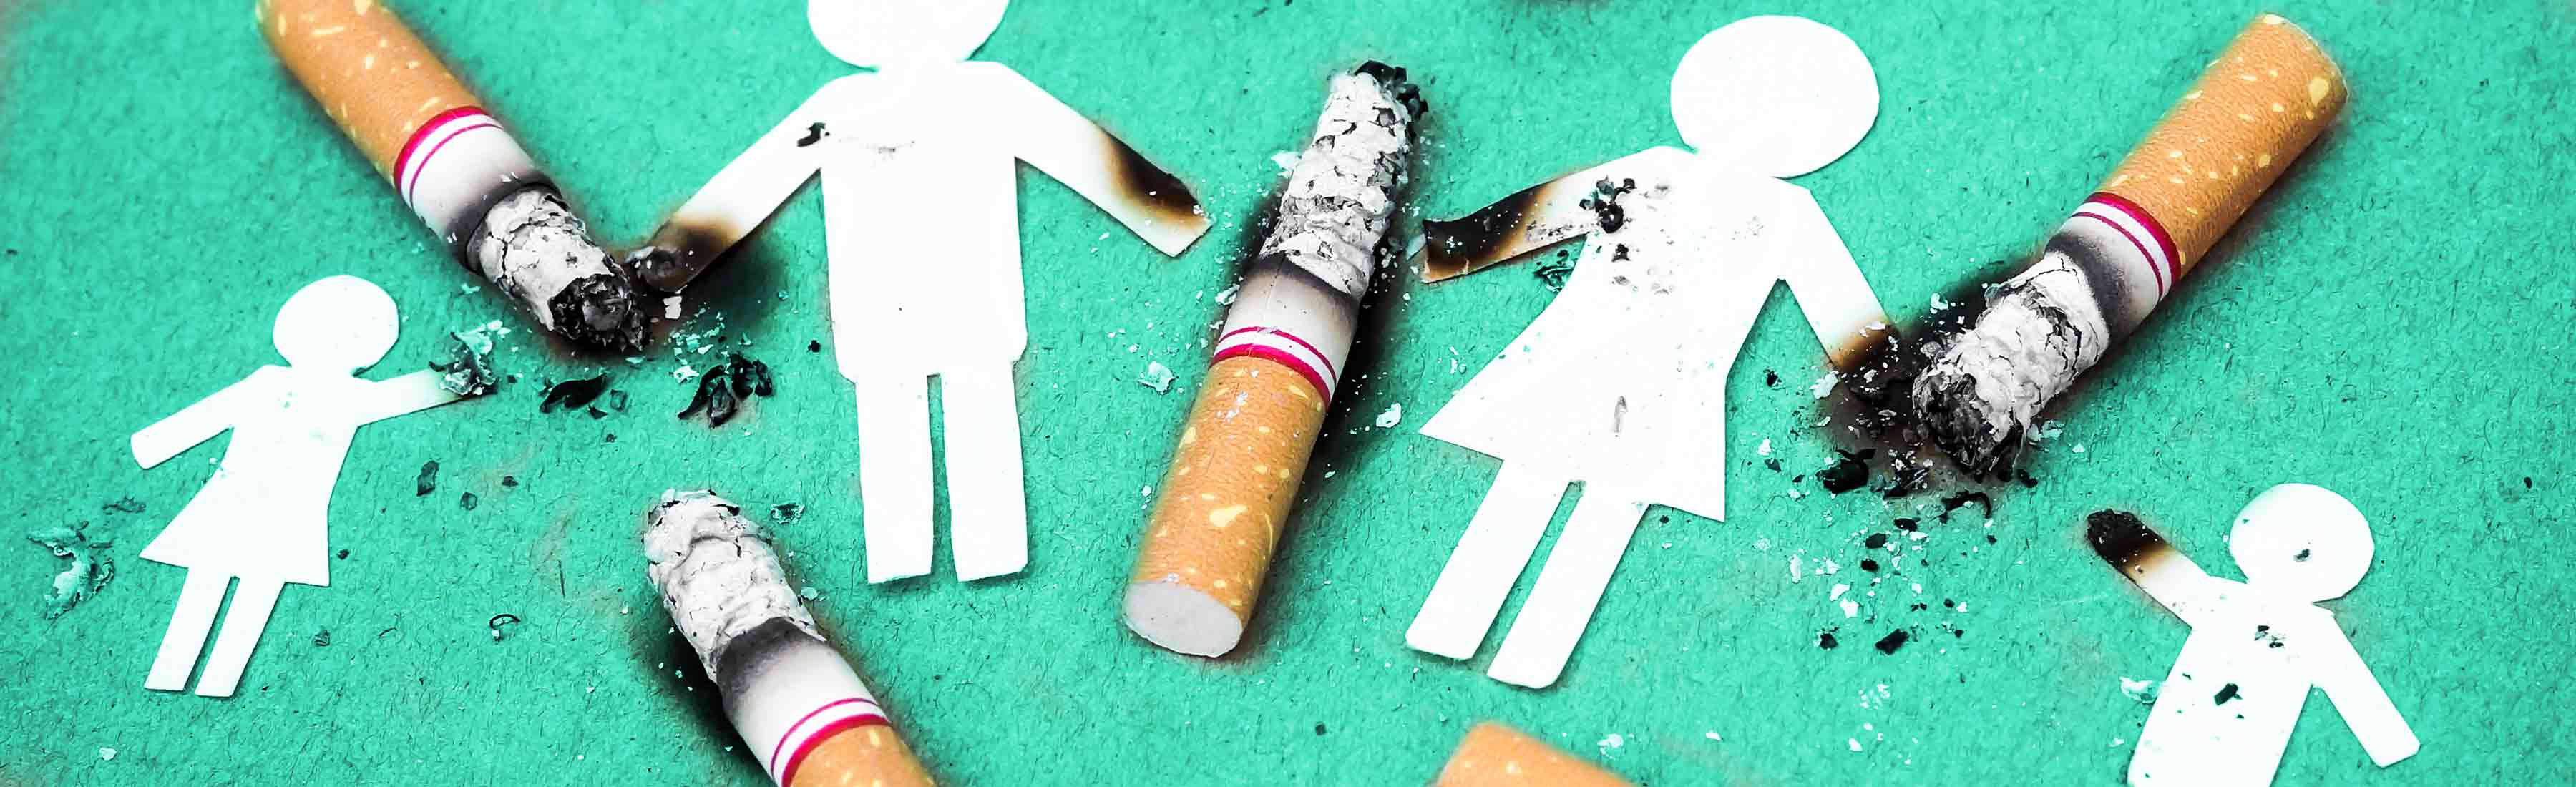 Second-hand Smoking Affects on Others